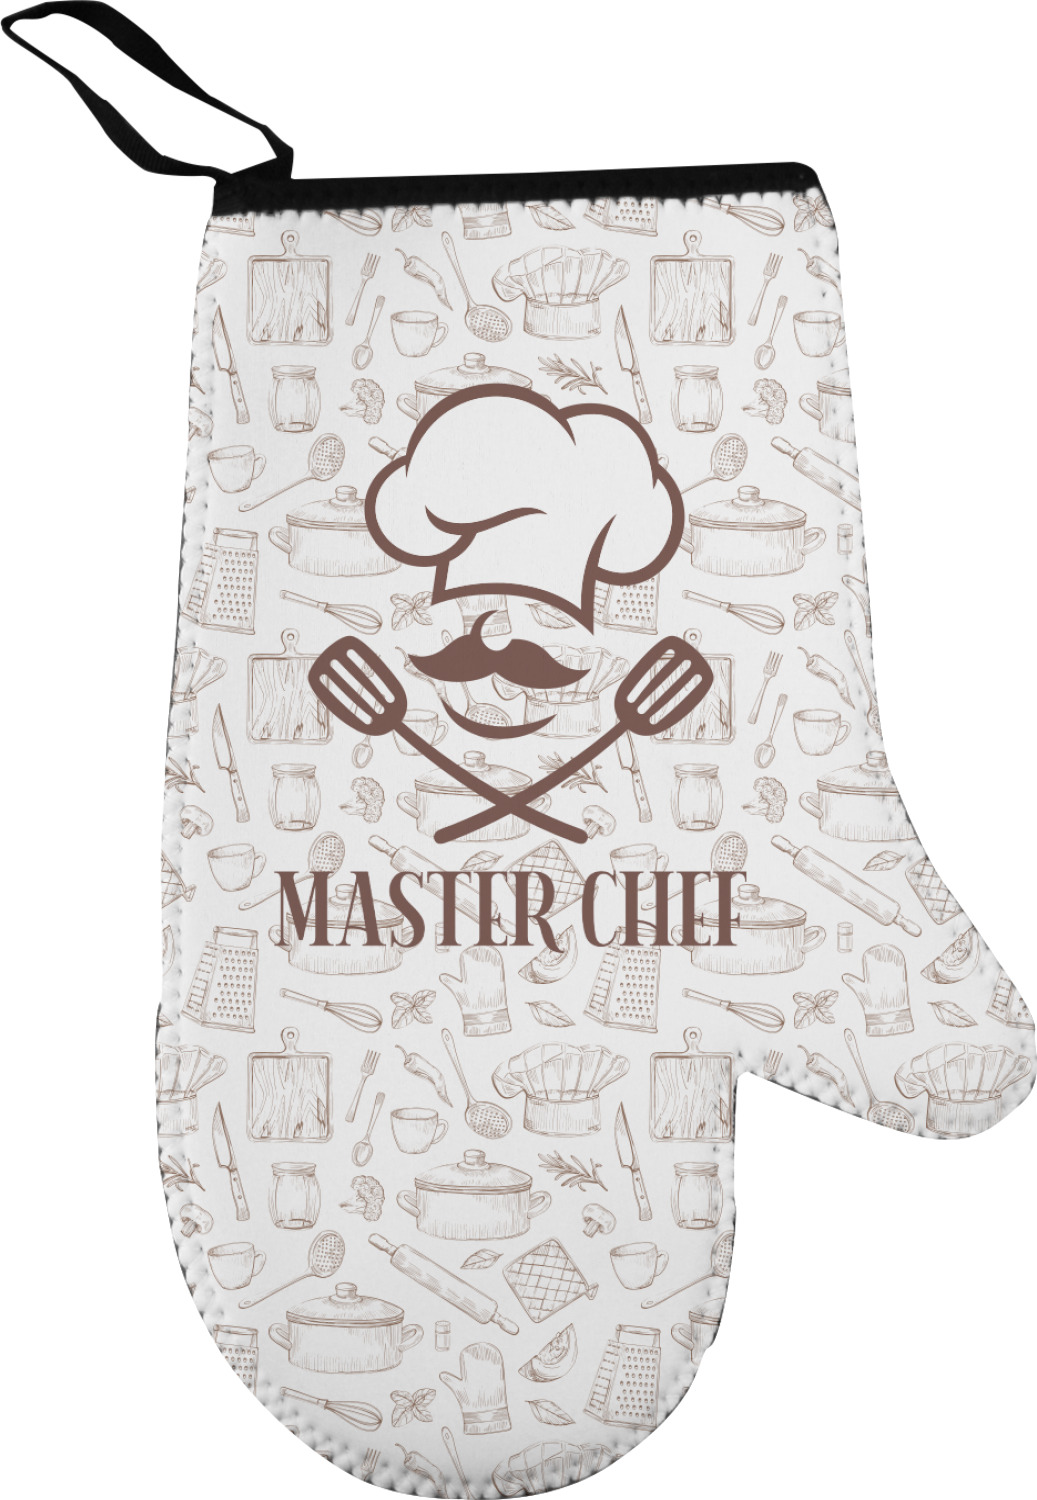 https://www.youcustomizeit.com/common/MAKE/4519519/Master-Chef-Personalized-Oven-Mitt.jpg?lm=1620775409